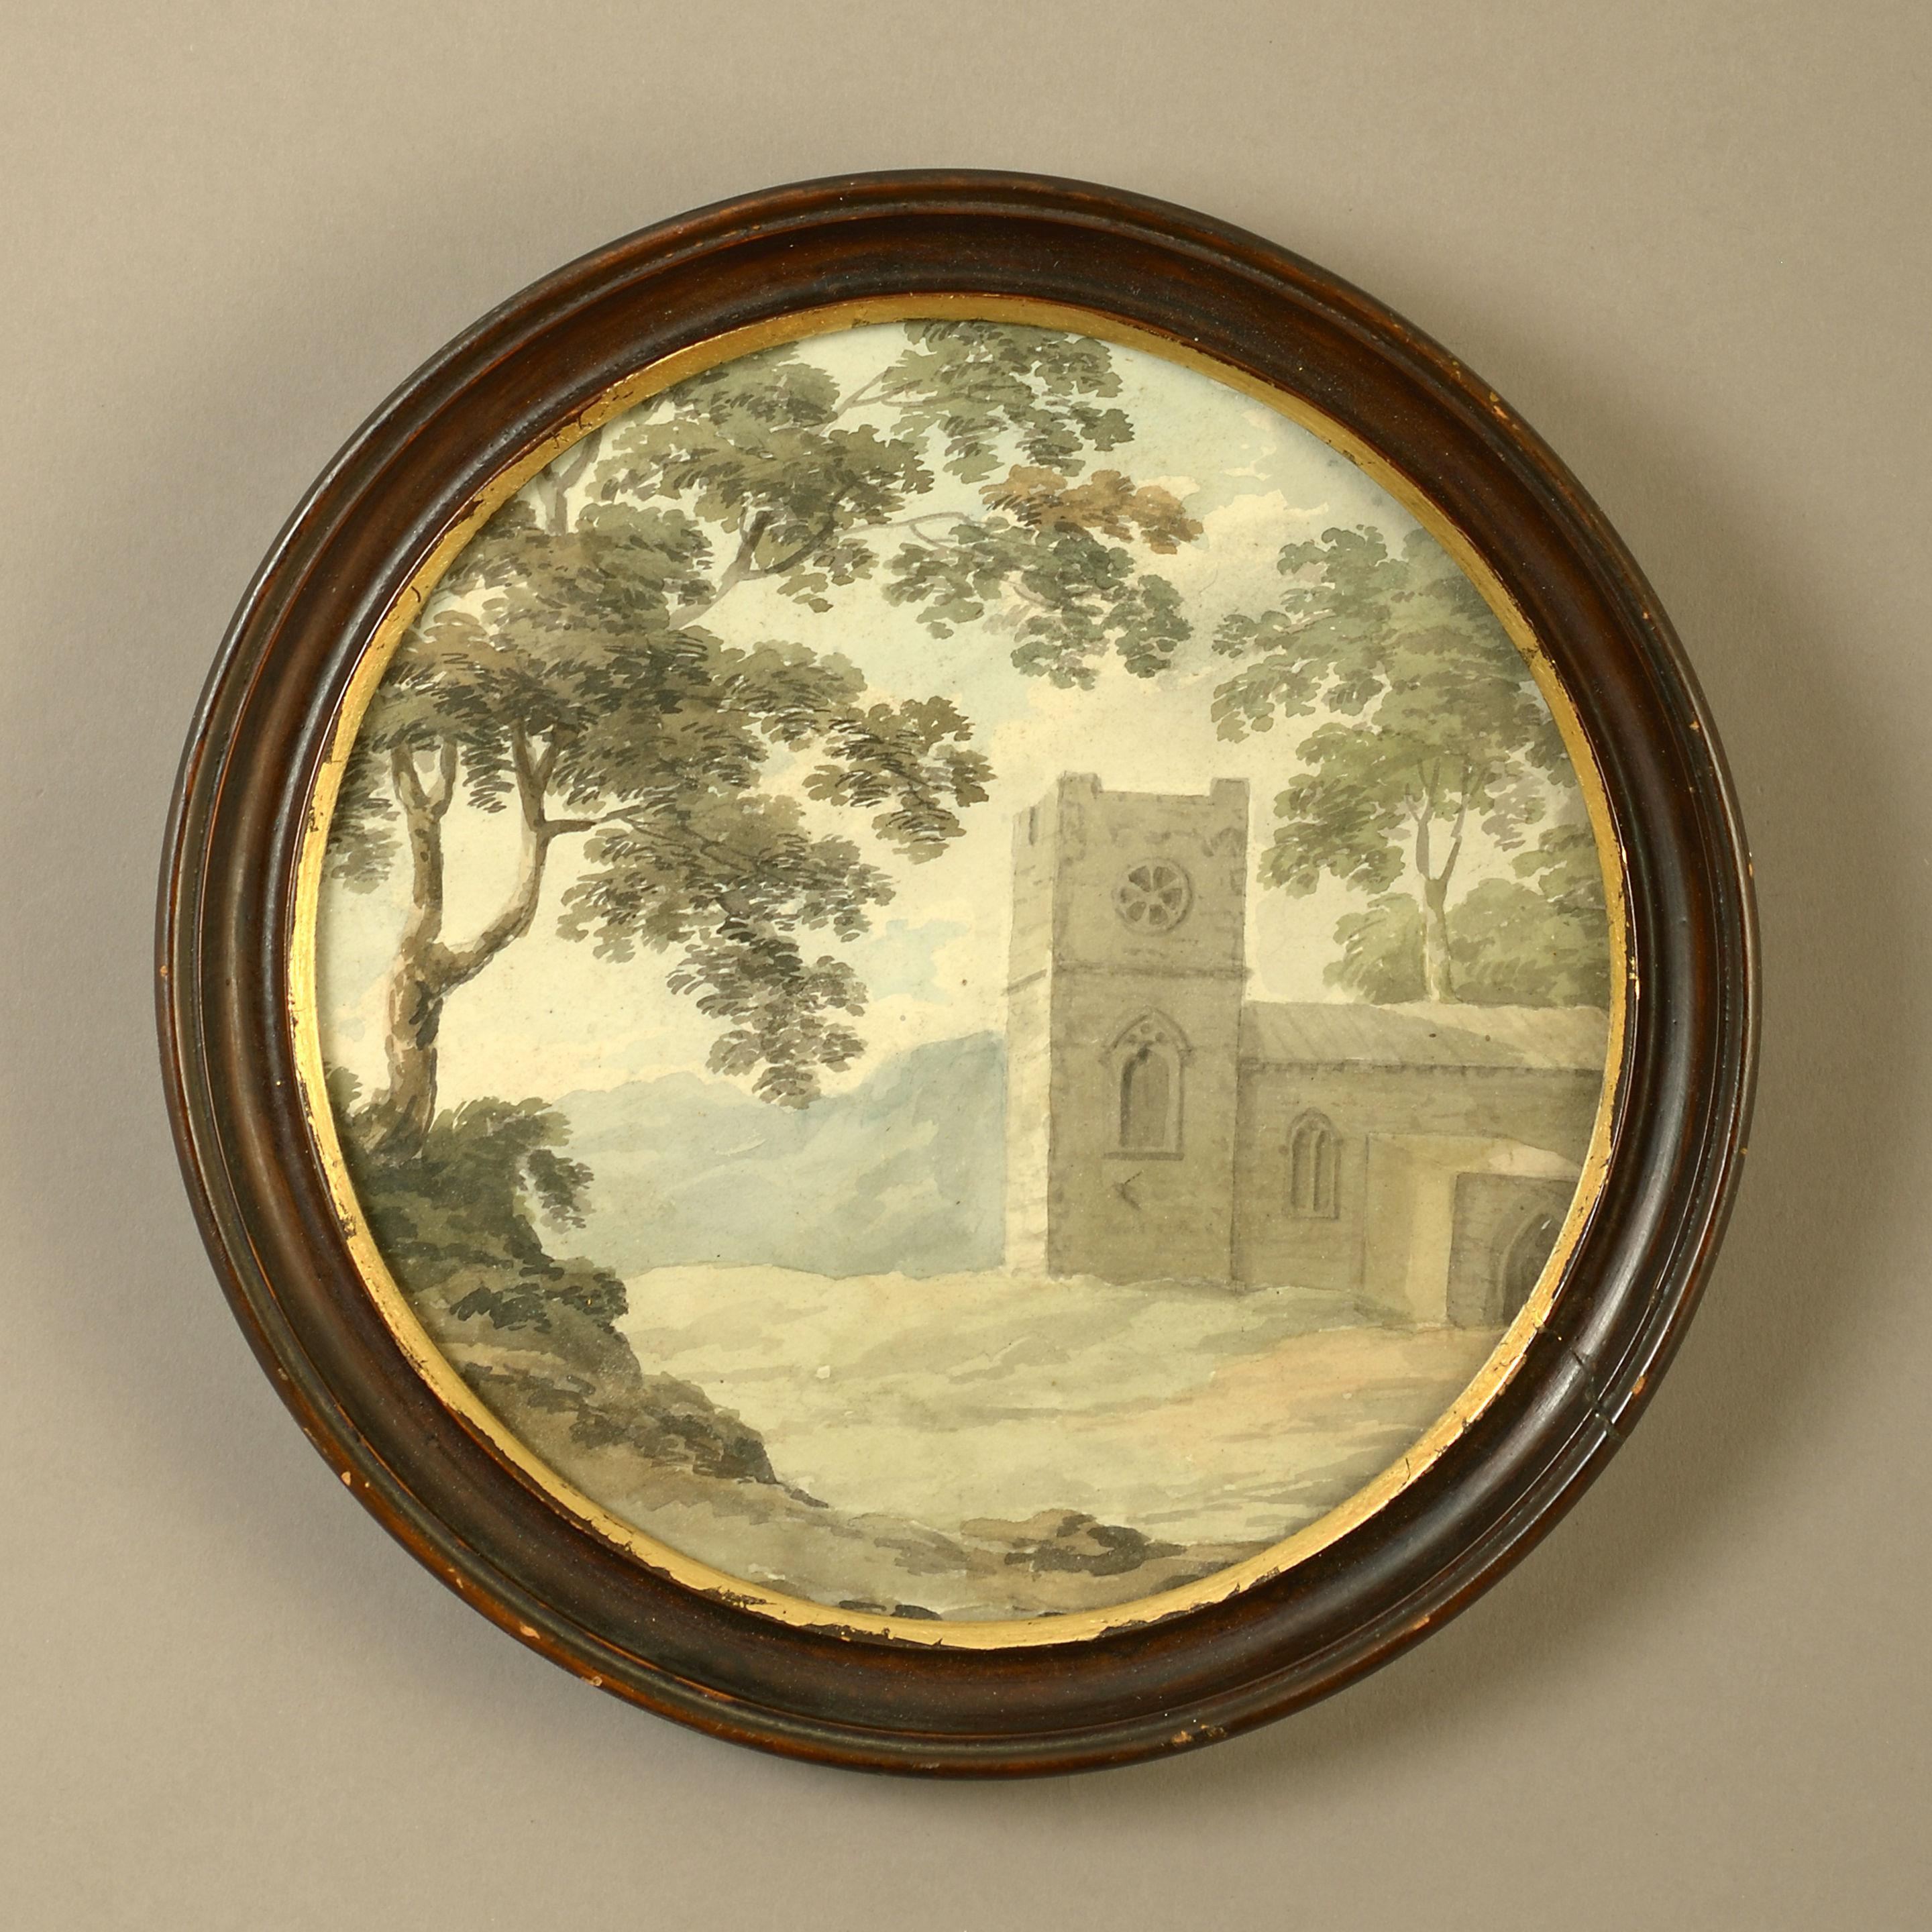 A charming Picturesque late 18th century watercolor depicting a Gothic church. Set within a circular wooden frame. 

Dimensions refer to size of frame.